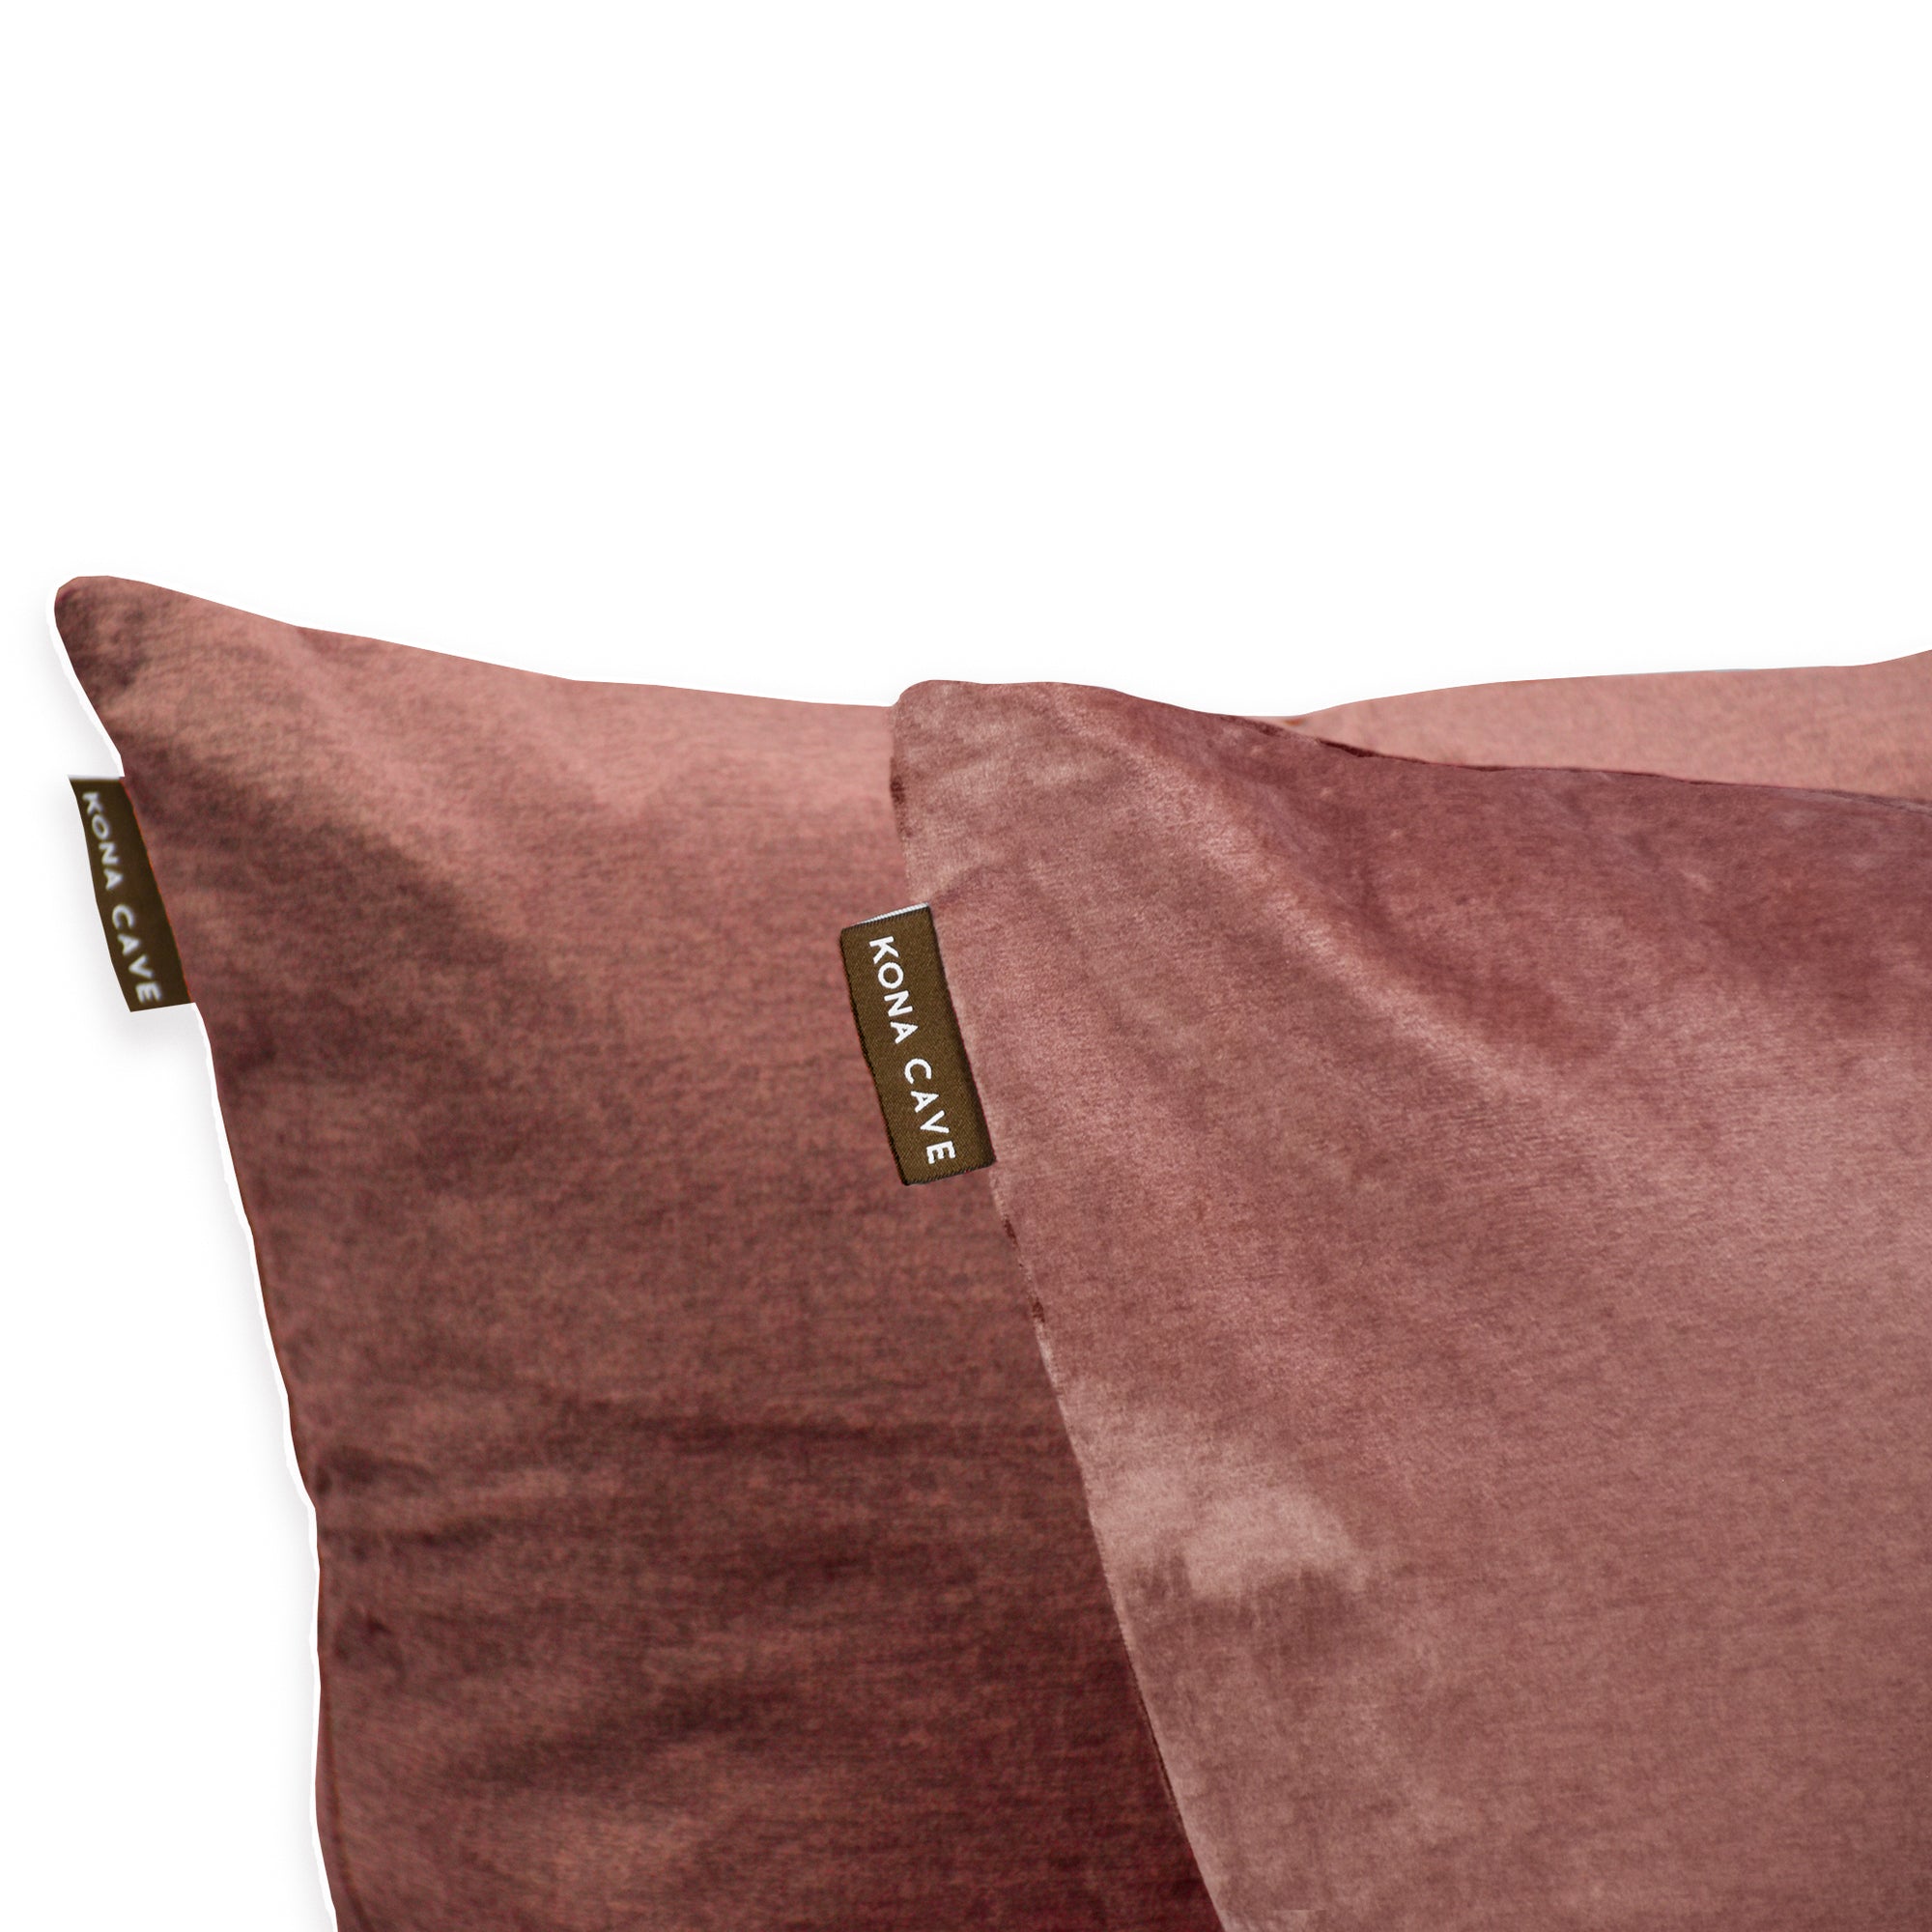 KONA CAVE® Cushion cover in pale pink velvet. washable, high-quality, soft, beautiful 